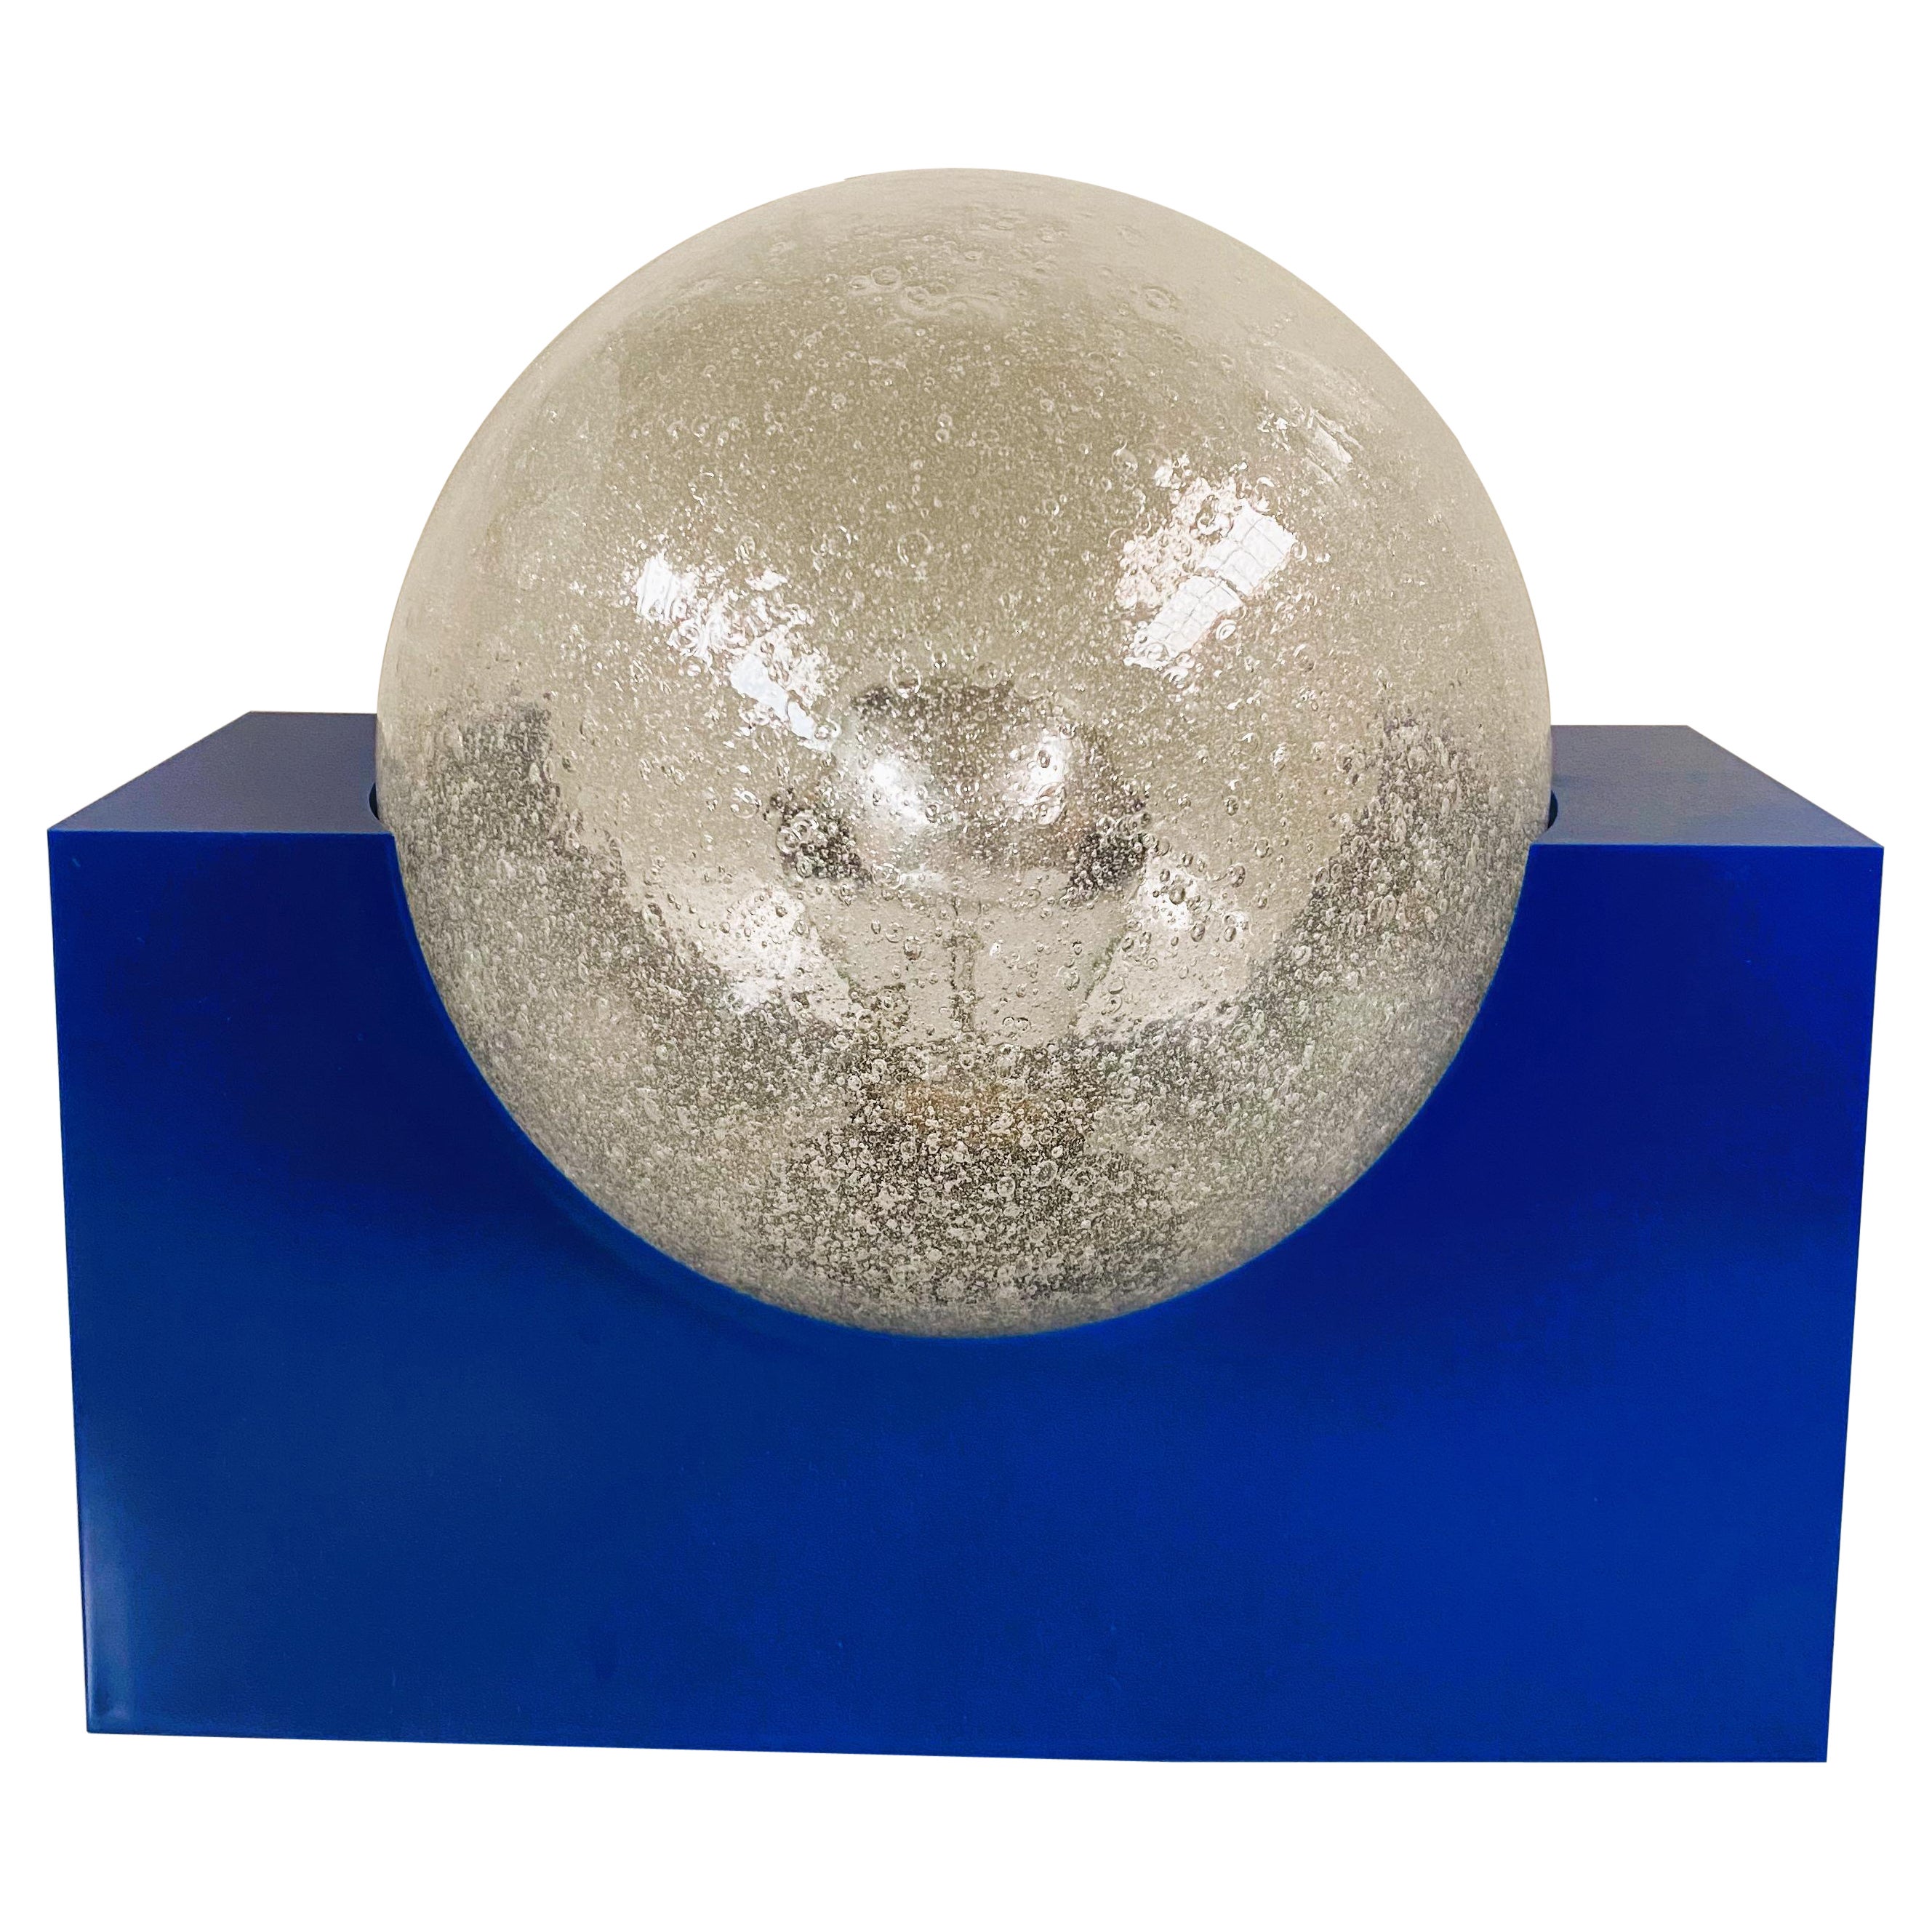 Bright Blue Acrylic Base and Bubble Glass Sphere by RAAK Amsterdam, Dutch Design For Sale